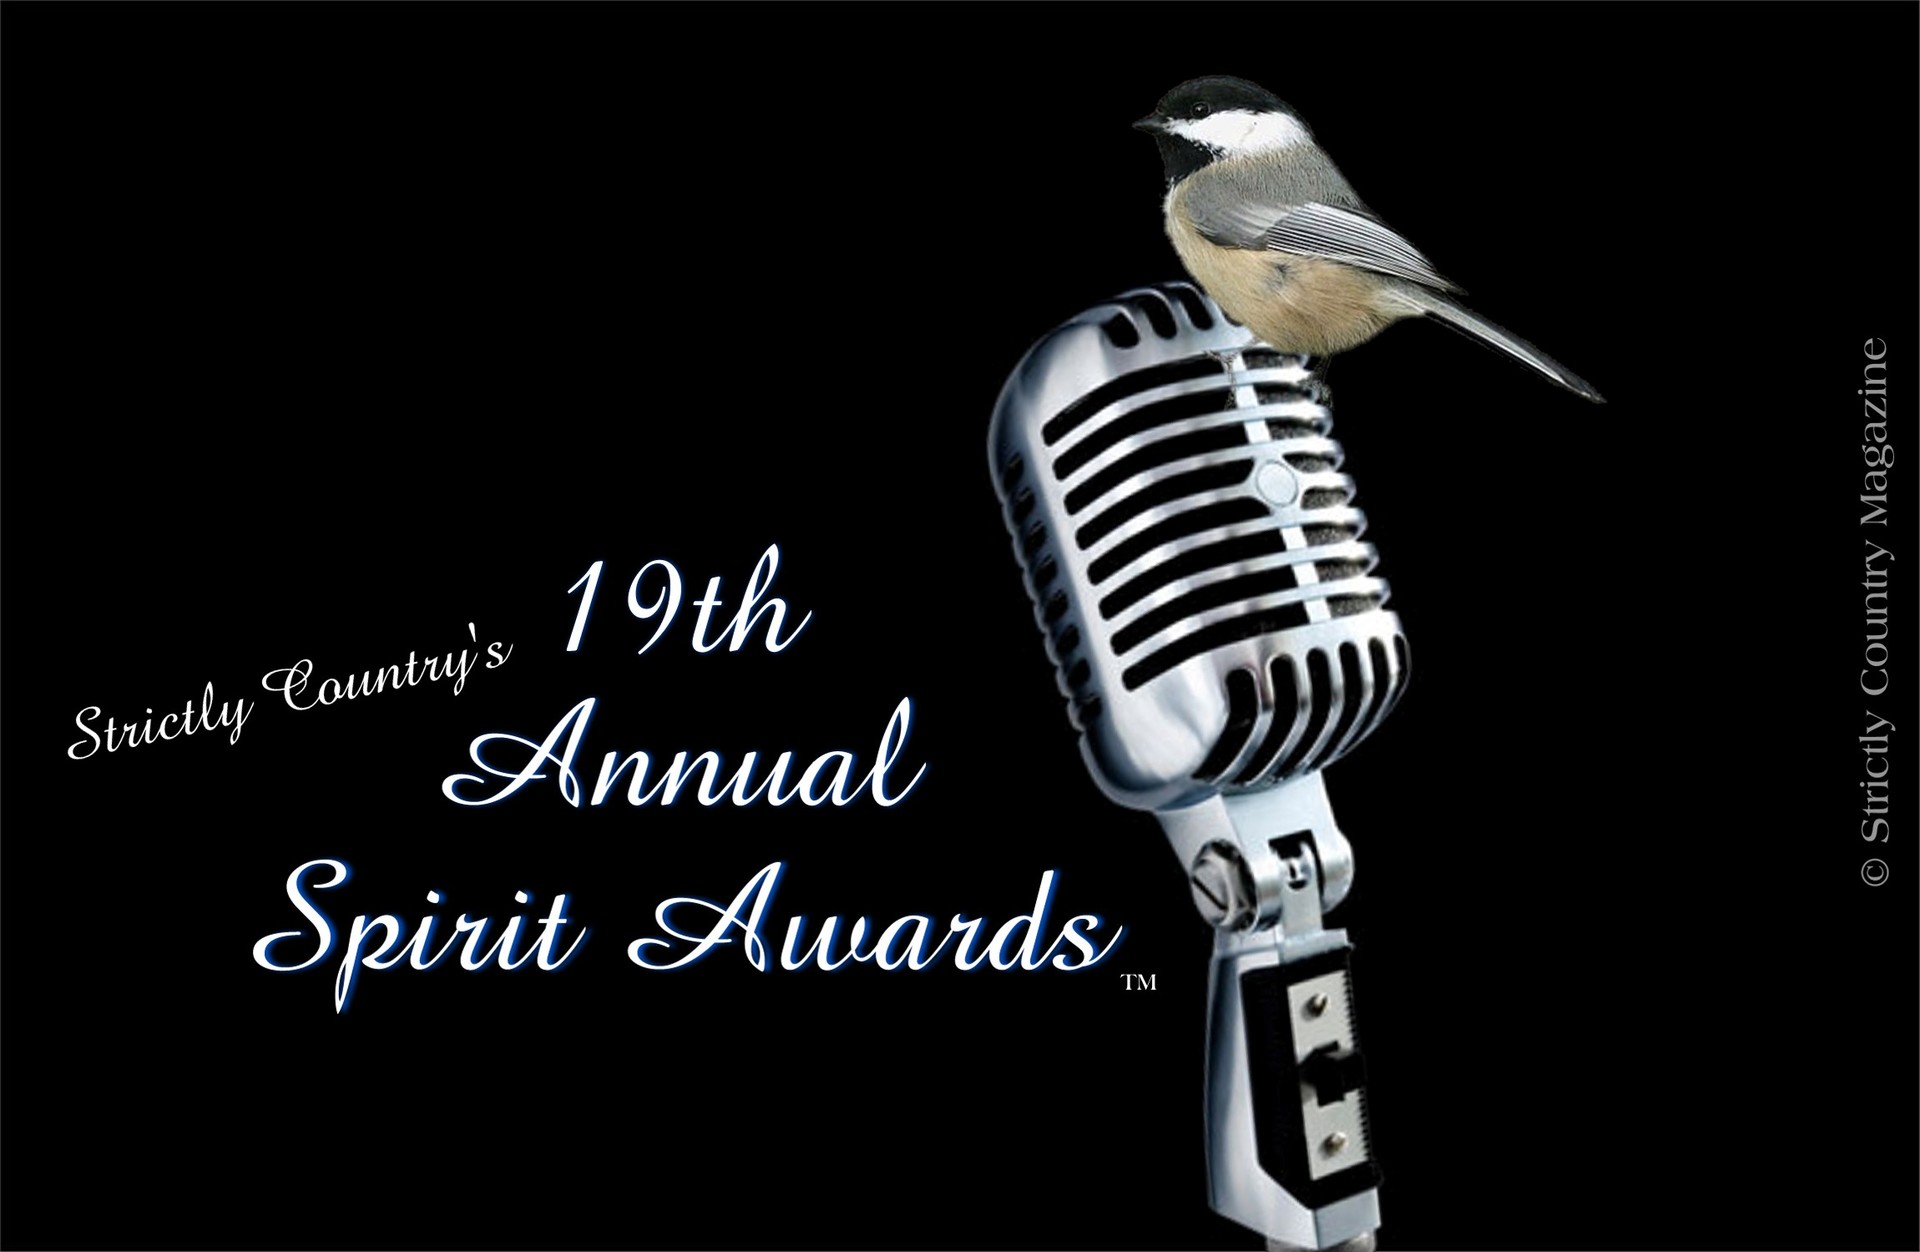 Strictly Country Magazine copyright 19th Annual Spirit Awards official logo